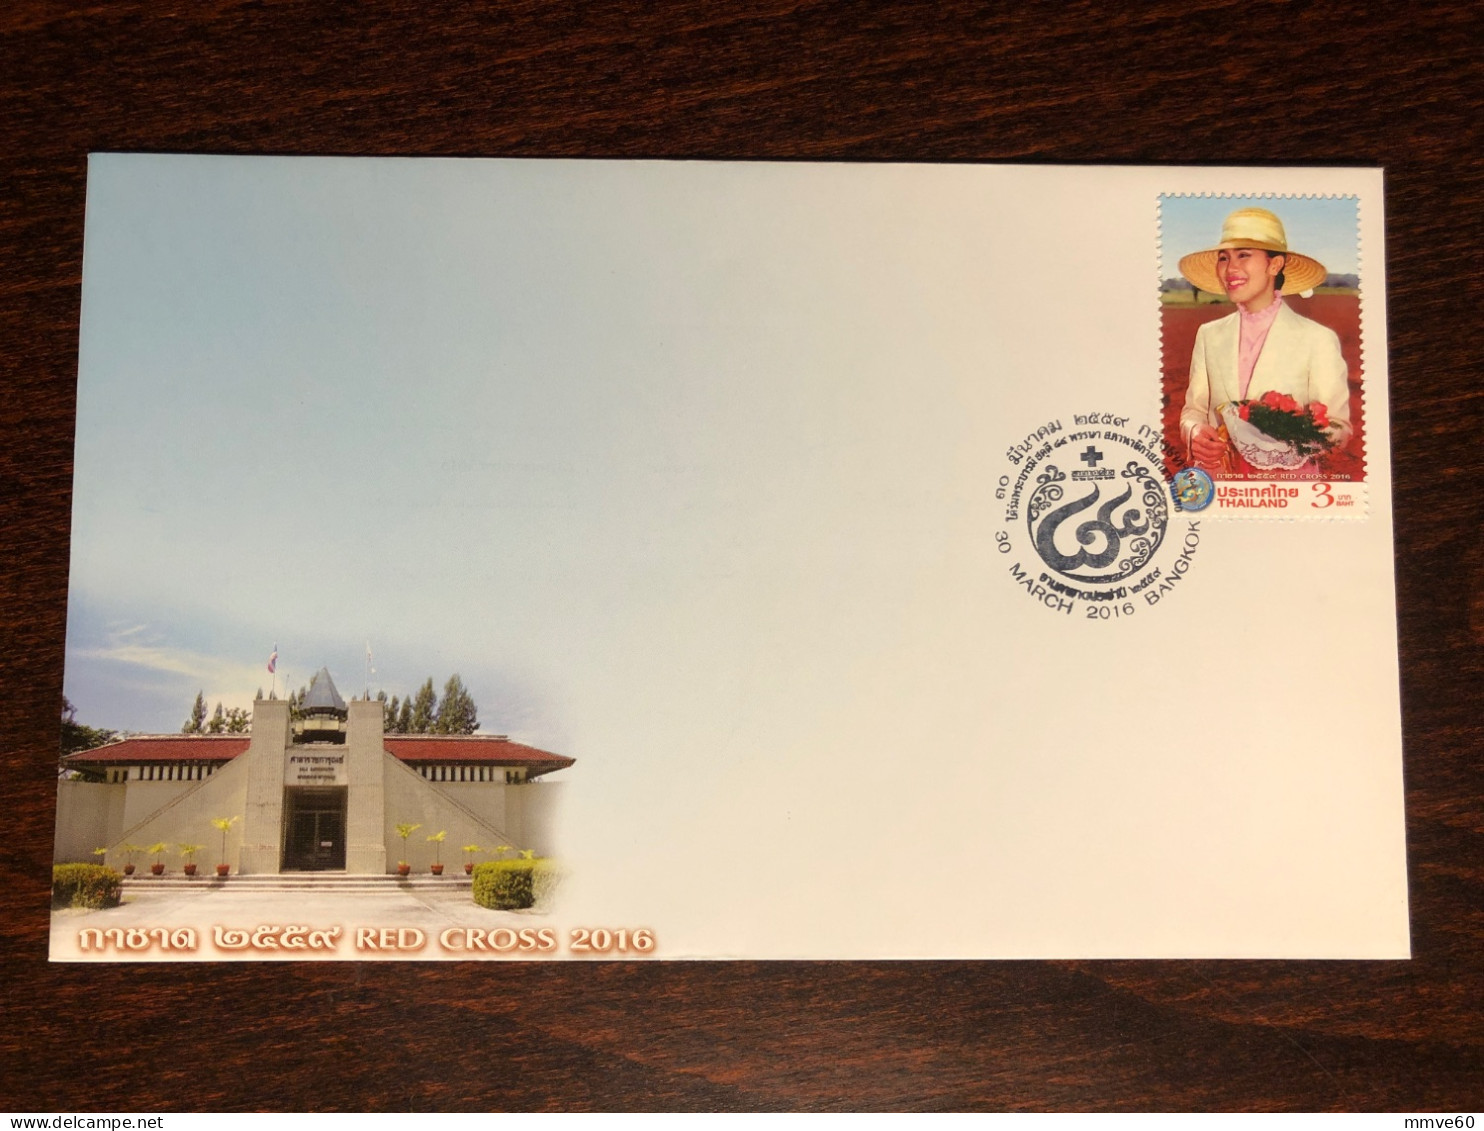 THAILAND FDC COVER 2016 YEAR RED CROSS HEALTH MEDICINE STAMPS - Thailand